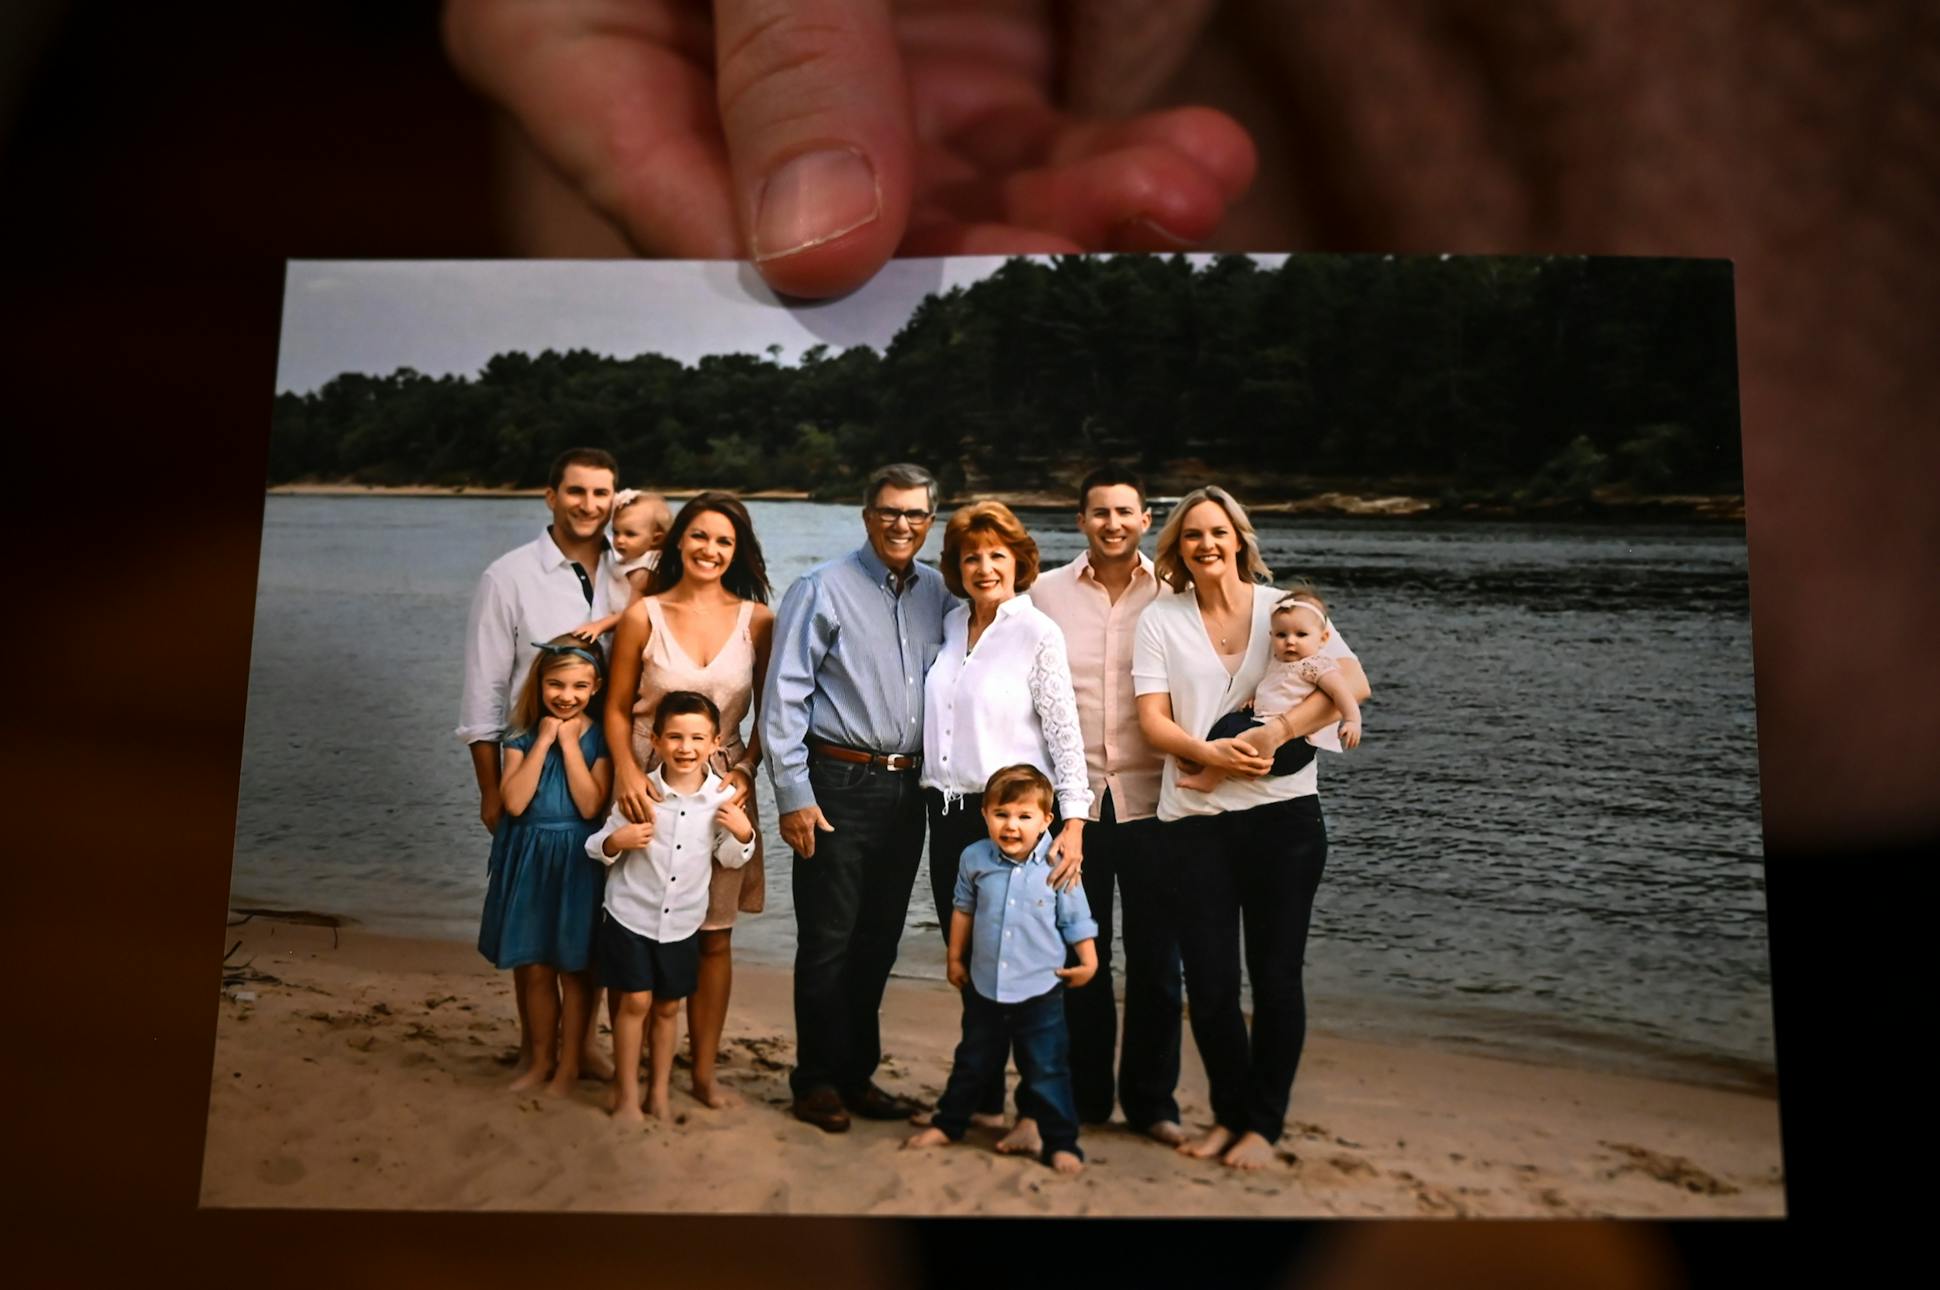 After the Vilione family gathered at a cabin last summer, five family members fell ill. Mother Carol, center, died in September. “She just really wanted to see us and the grandkids, so they decided to come,” Holly said, with tears in her eyes. “And not a day goes by when I don't regret that decision.”